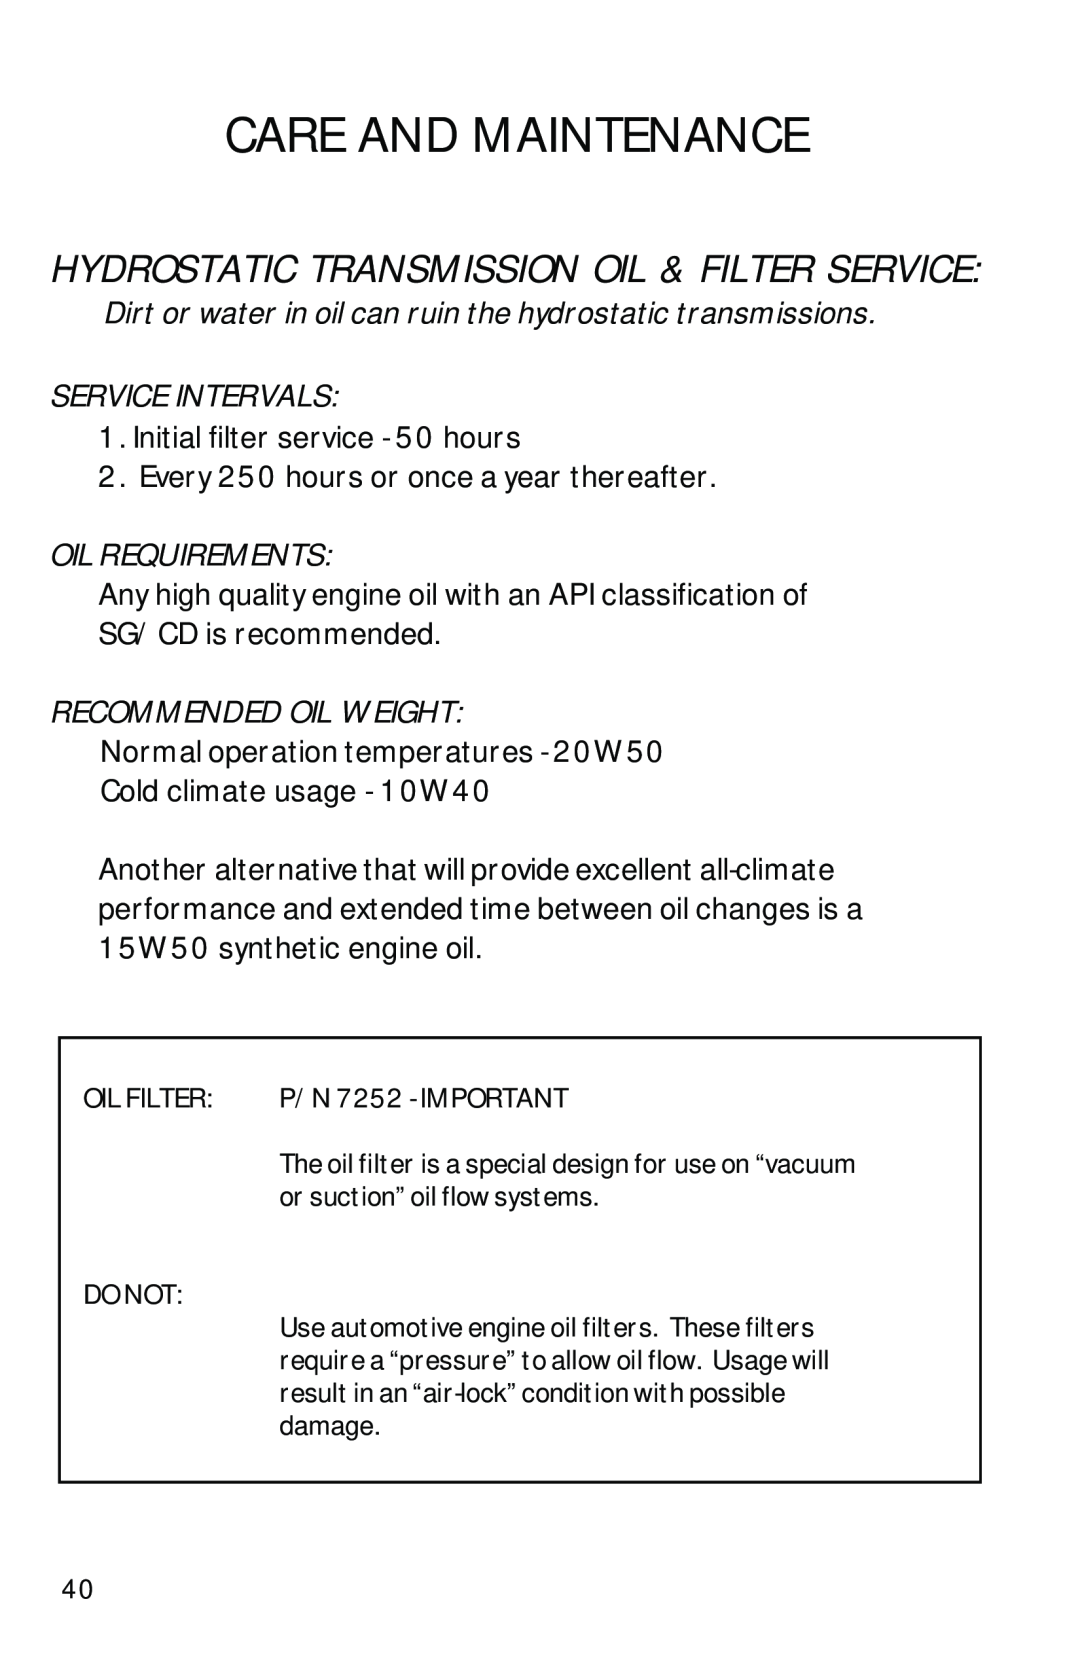 Dixon ZTR 2300 Hydrostatic Transmission Oil & Filter Service, Dirt or water in oil can ruin the hydrostatic transmissions 